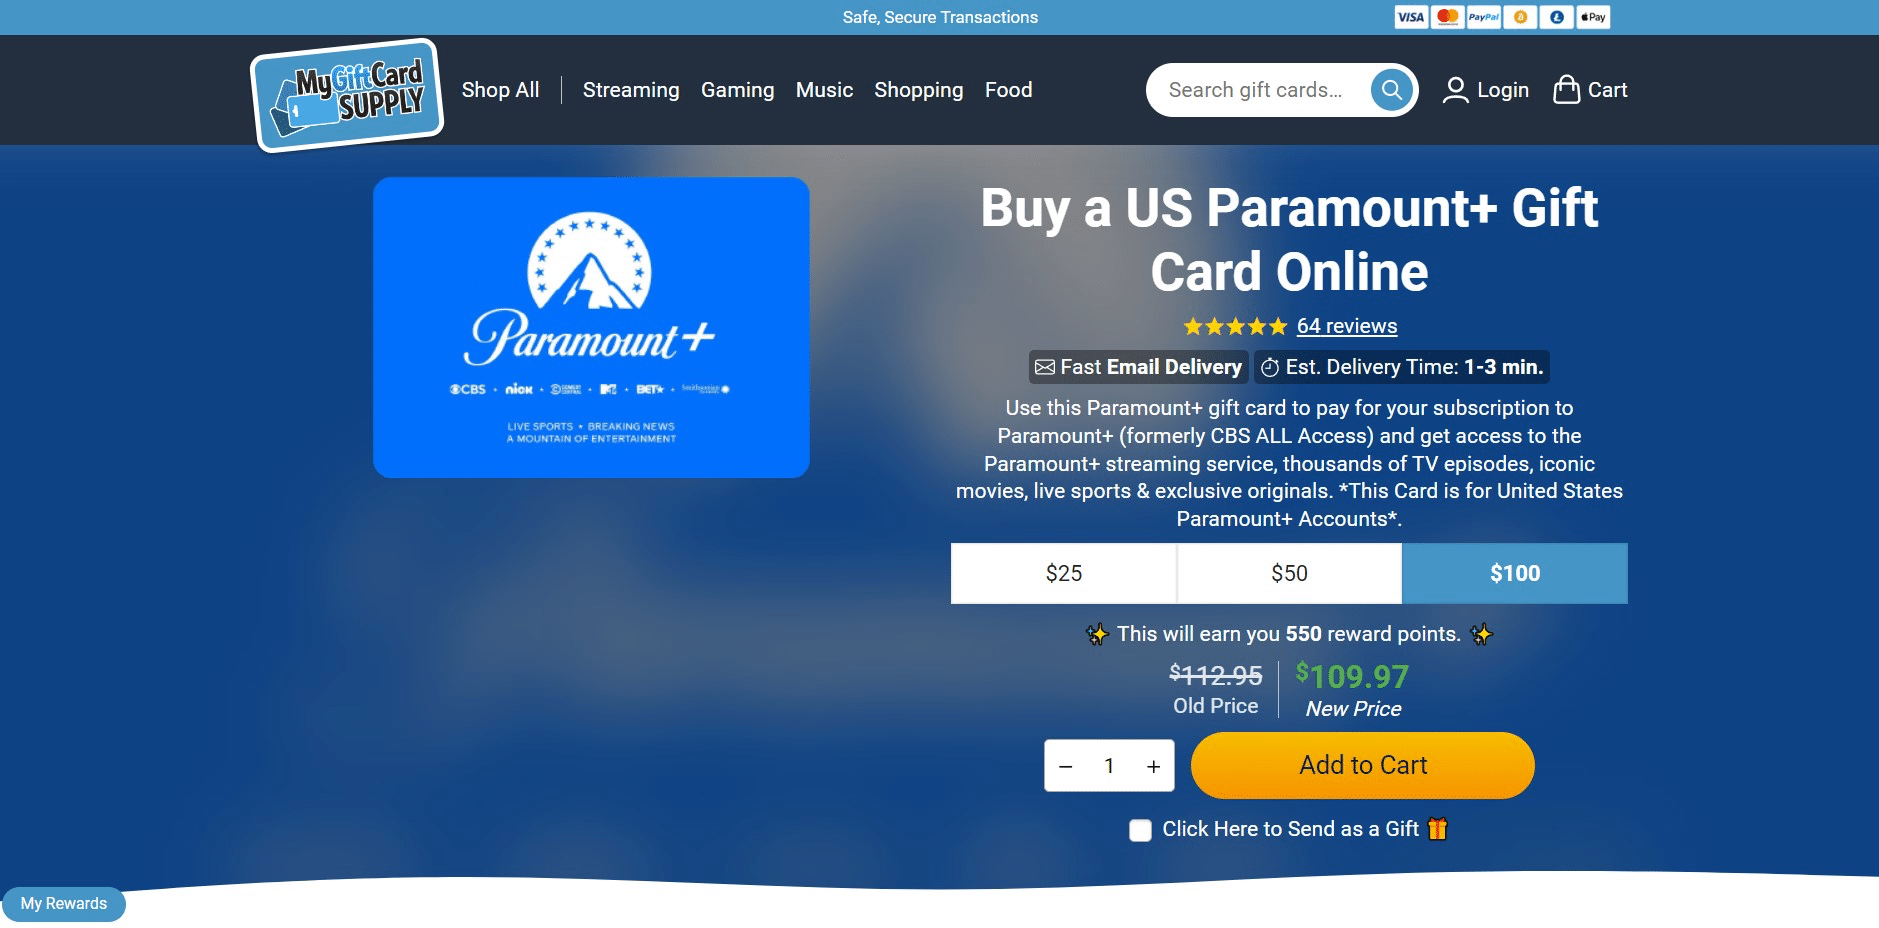 US Paramount+ gift card online screen